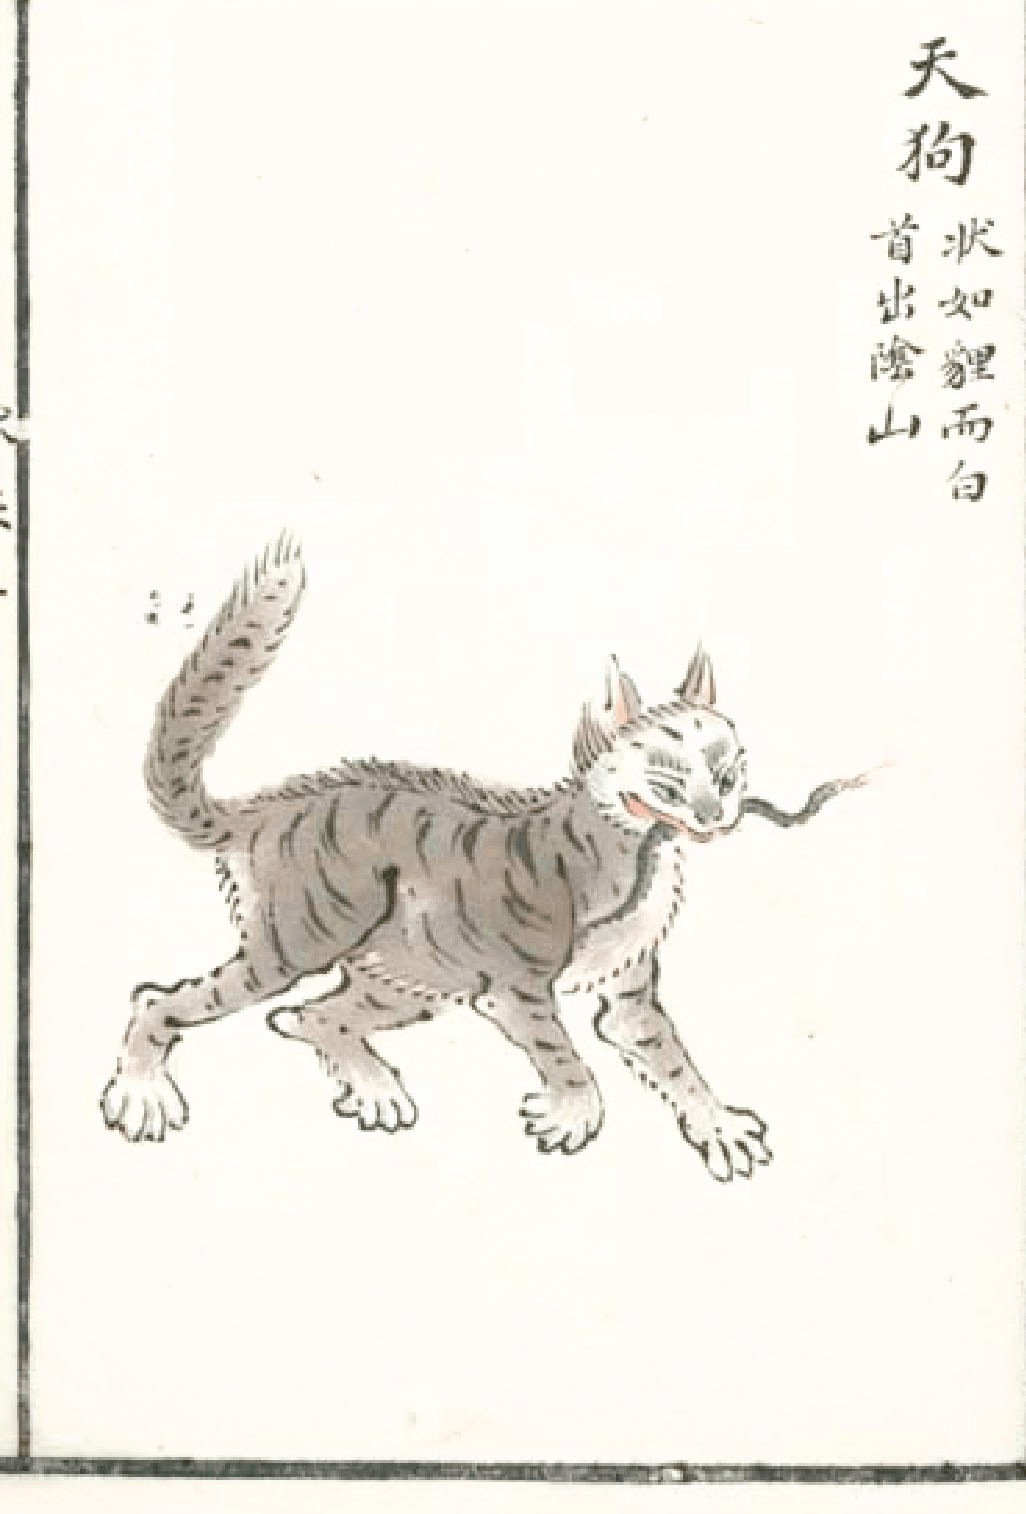 TianGou/天狗: the name means "Heaven Dog", but looks like a mountain cat, with a white head.